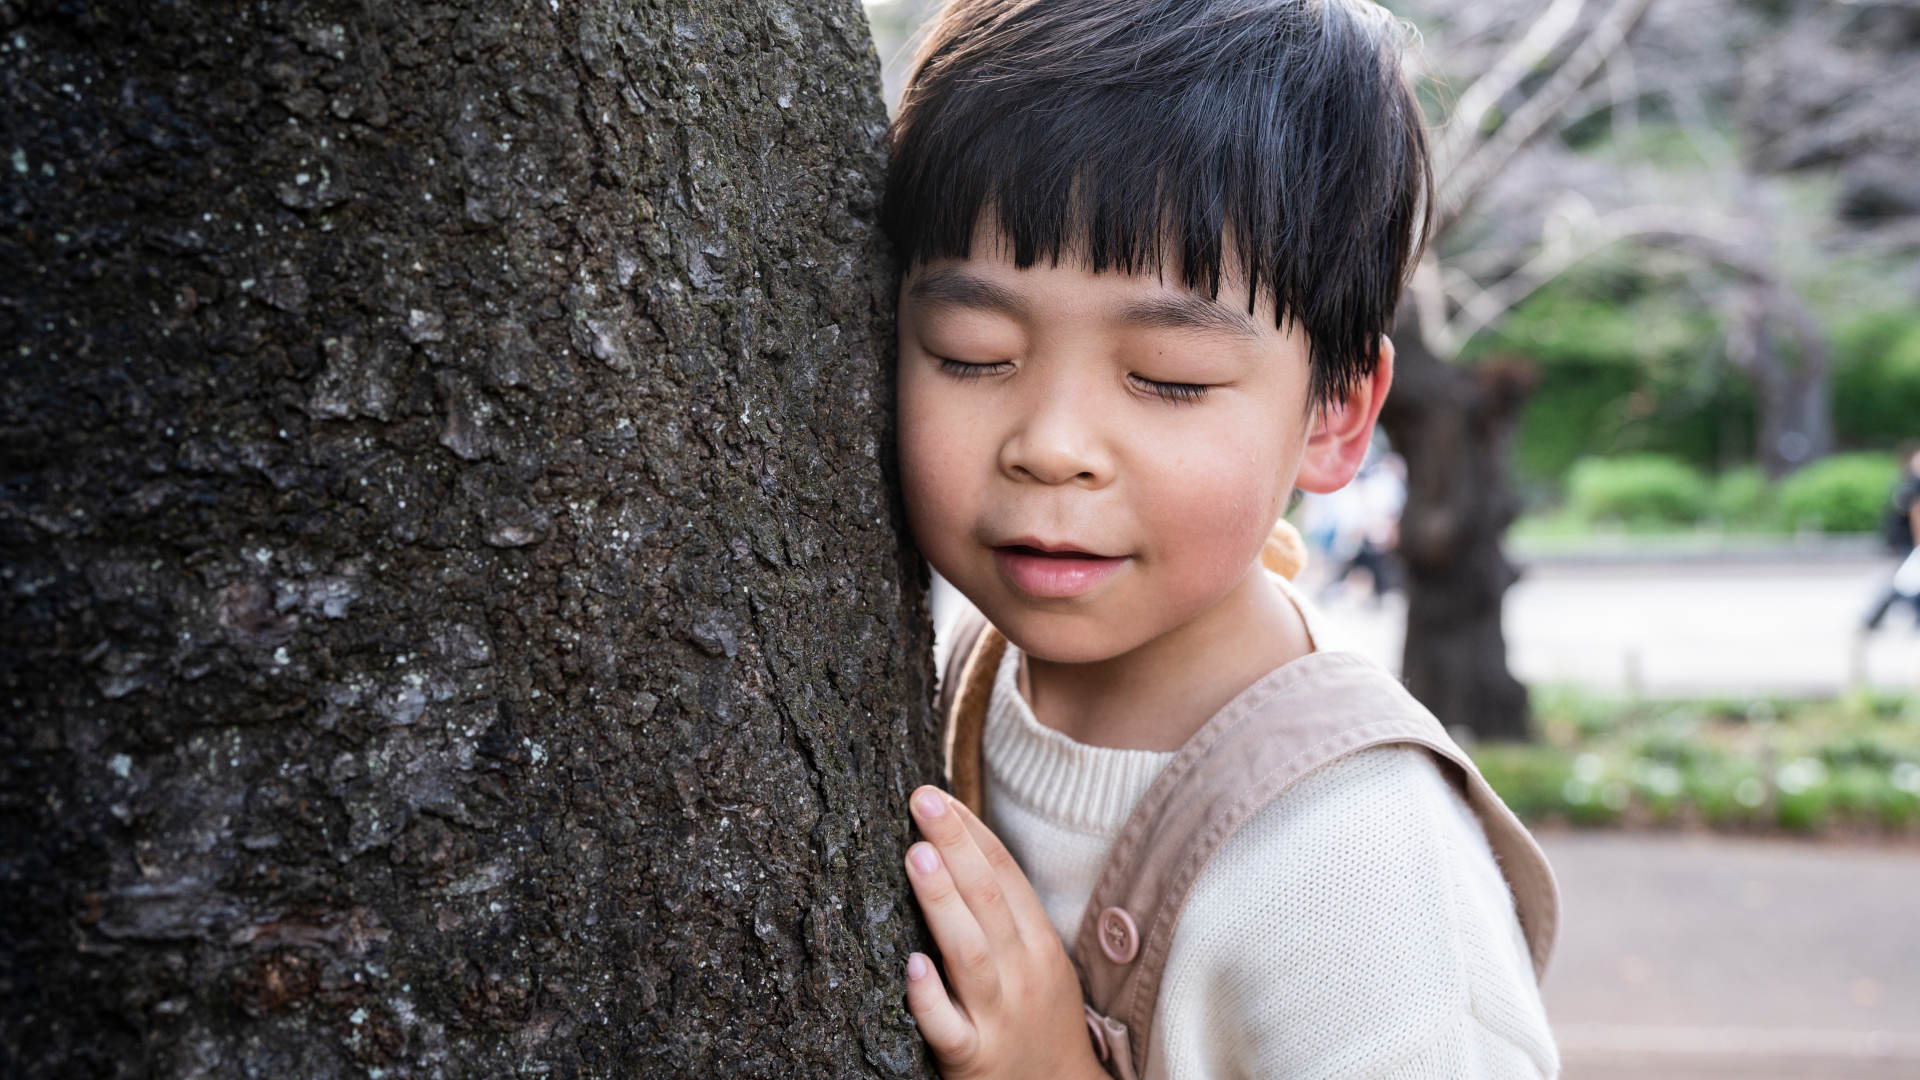 a boy puts his ear to a tree and listens